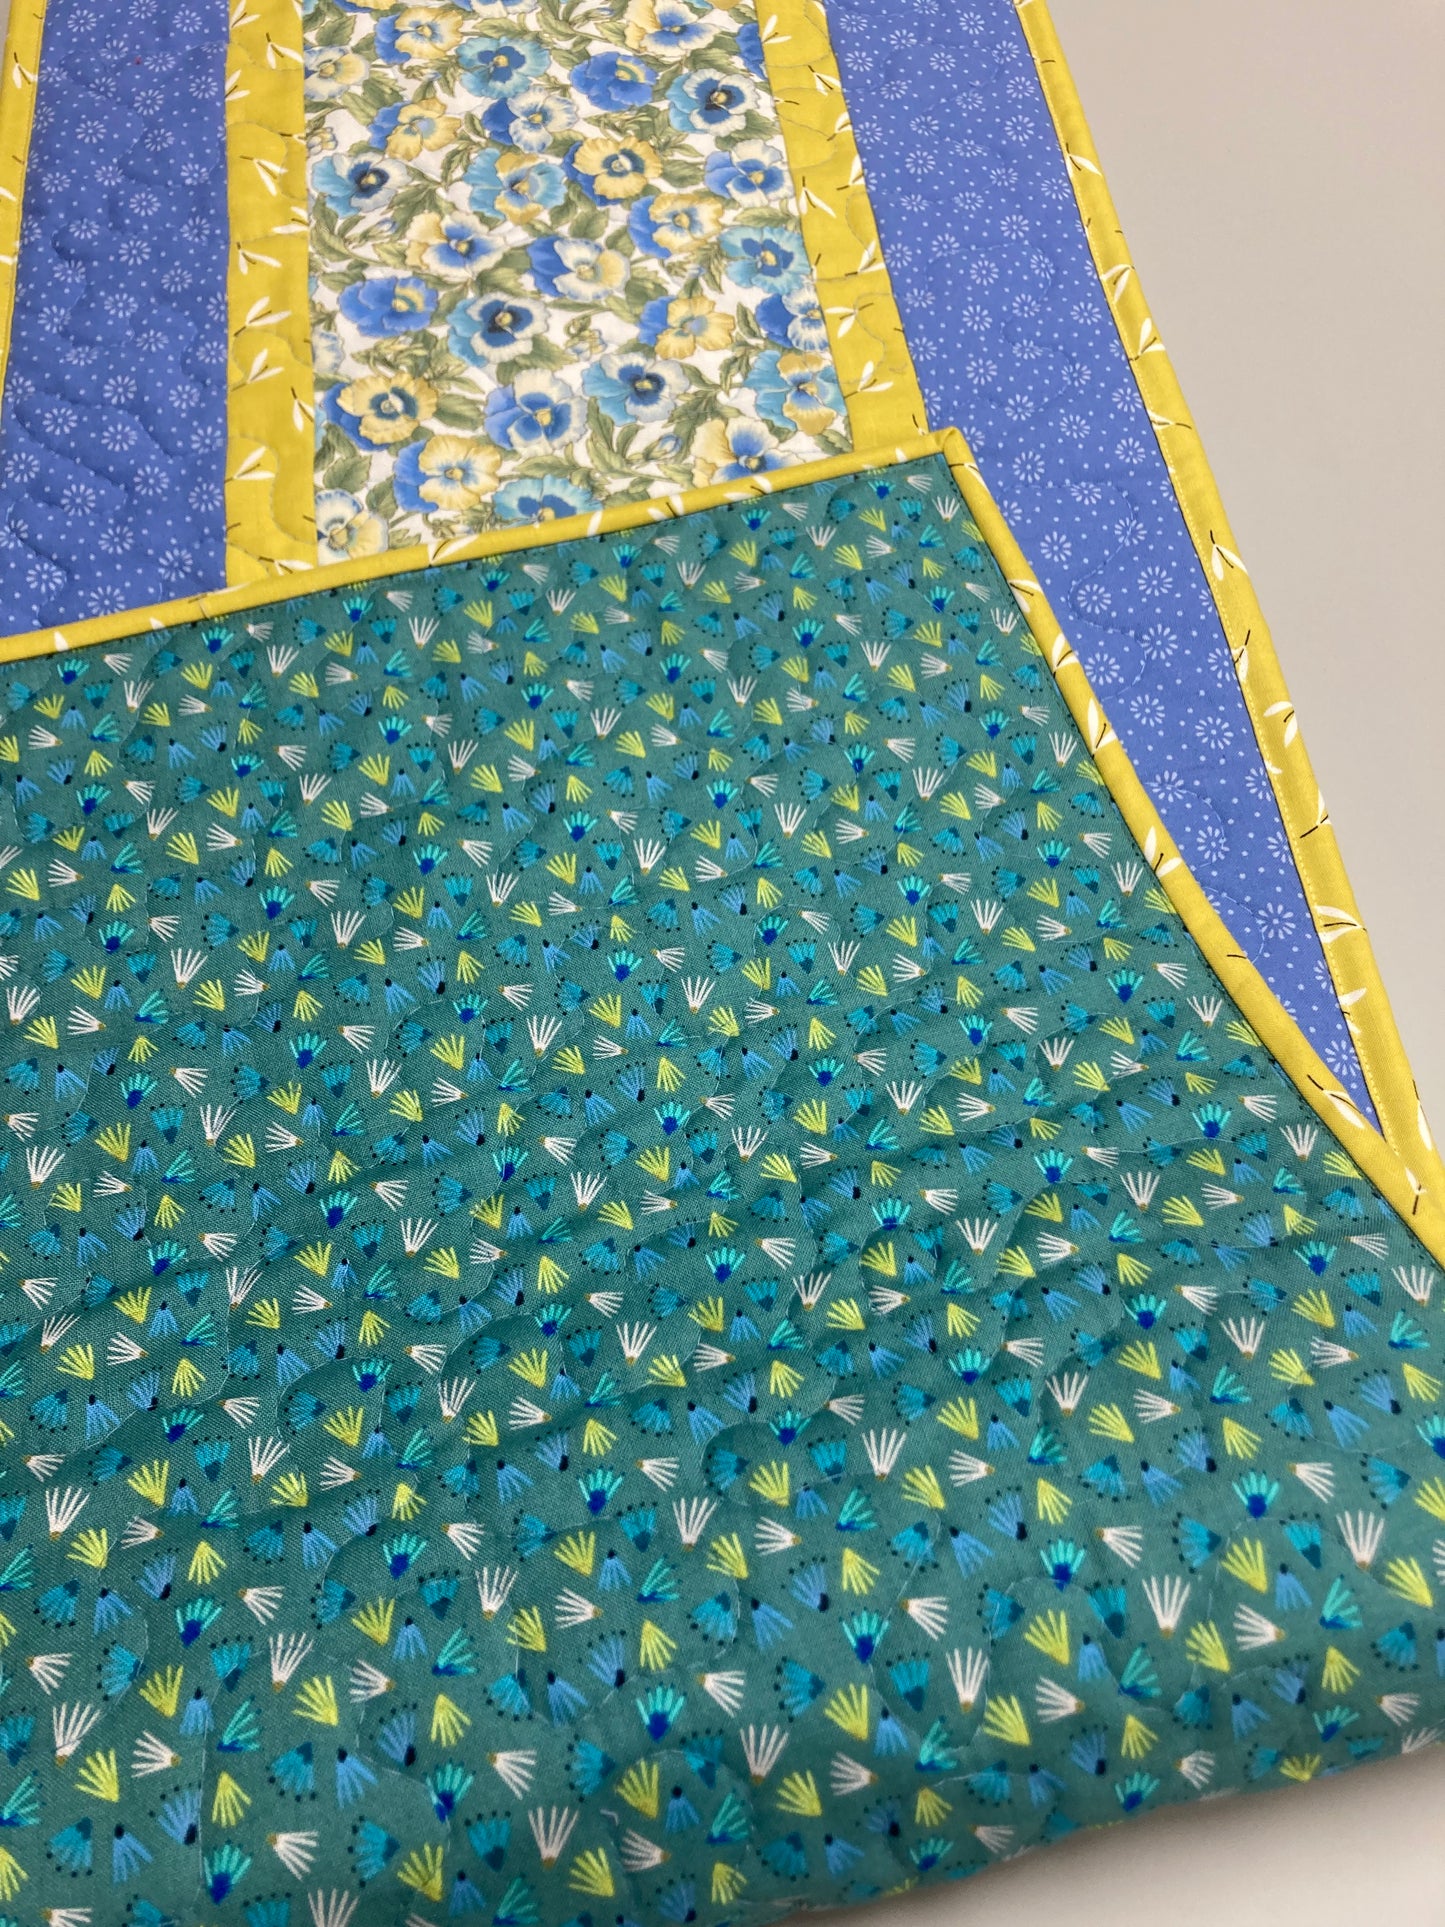 Summer Pansies Quilted Dining Table Runner, Blue Yellow Reversible 13x48" Handmade, Coffee End Table Nightstand Dresser Scarf Spring Easter